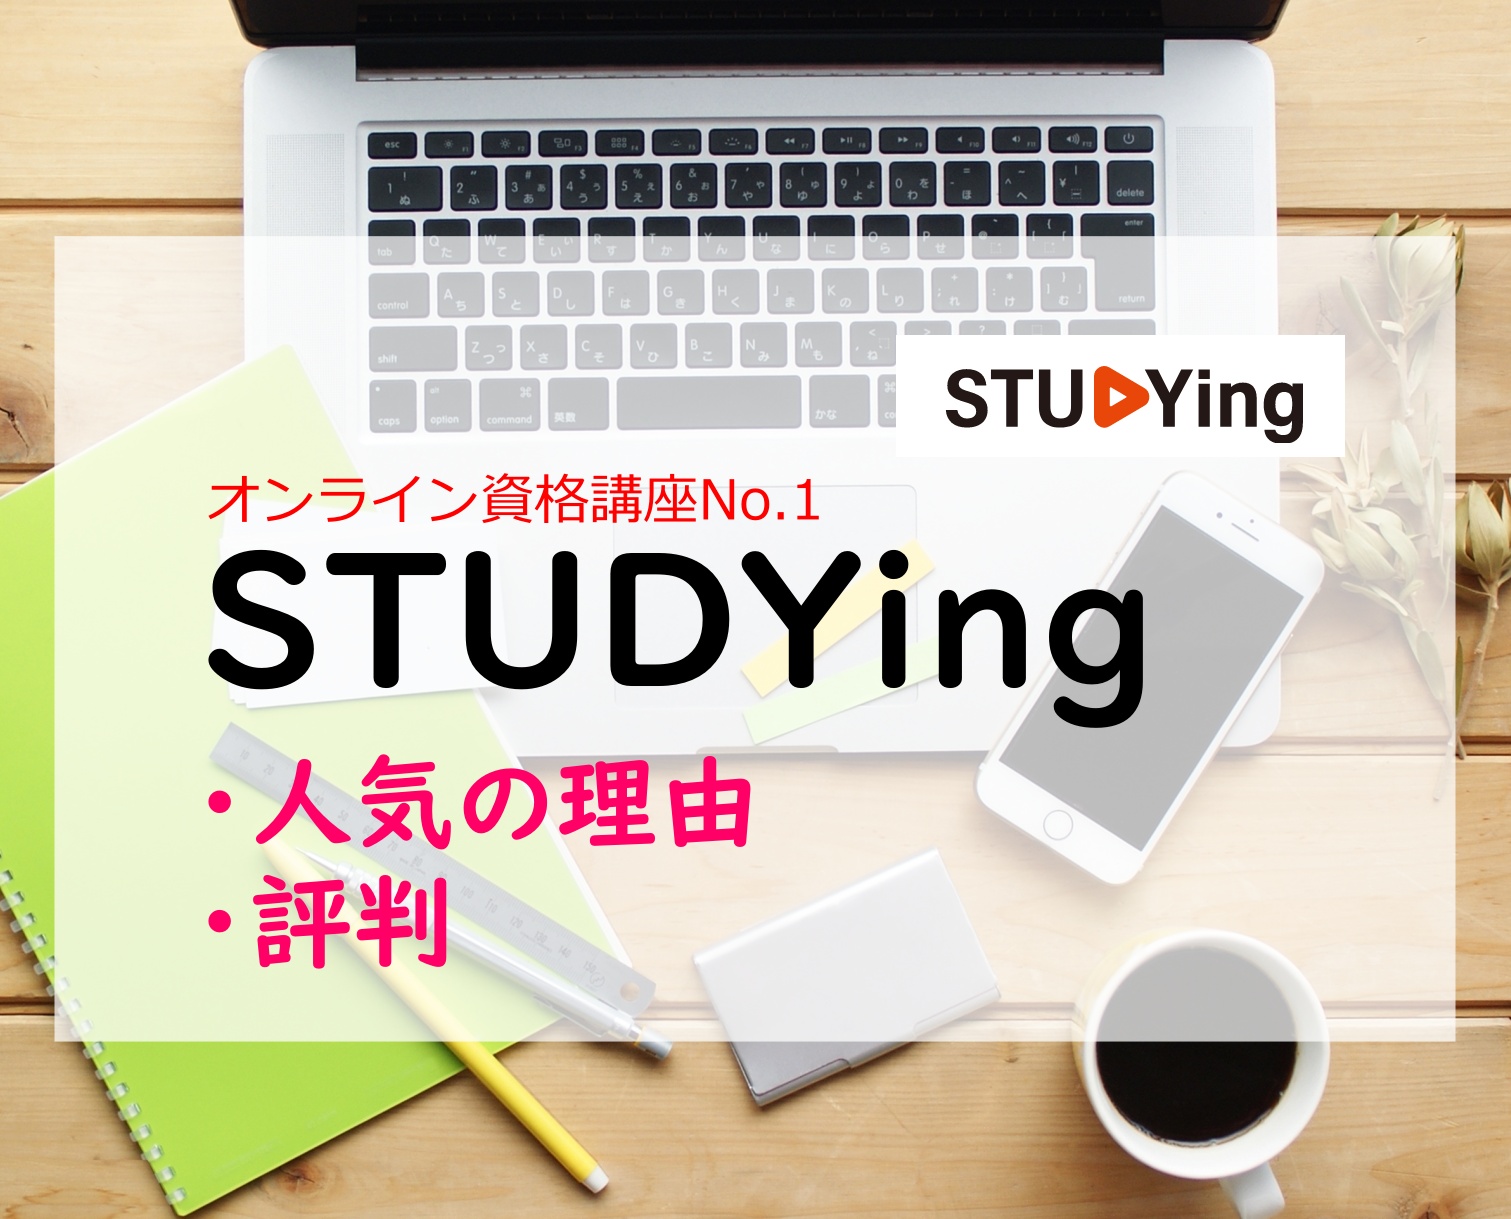 STUDYing　人気の理由・評判